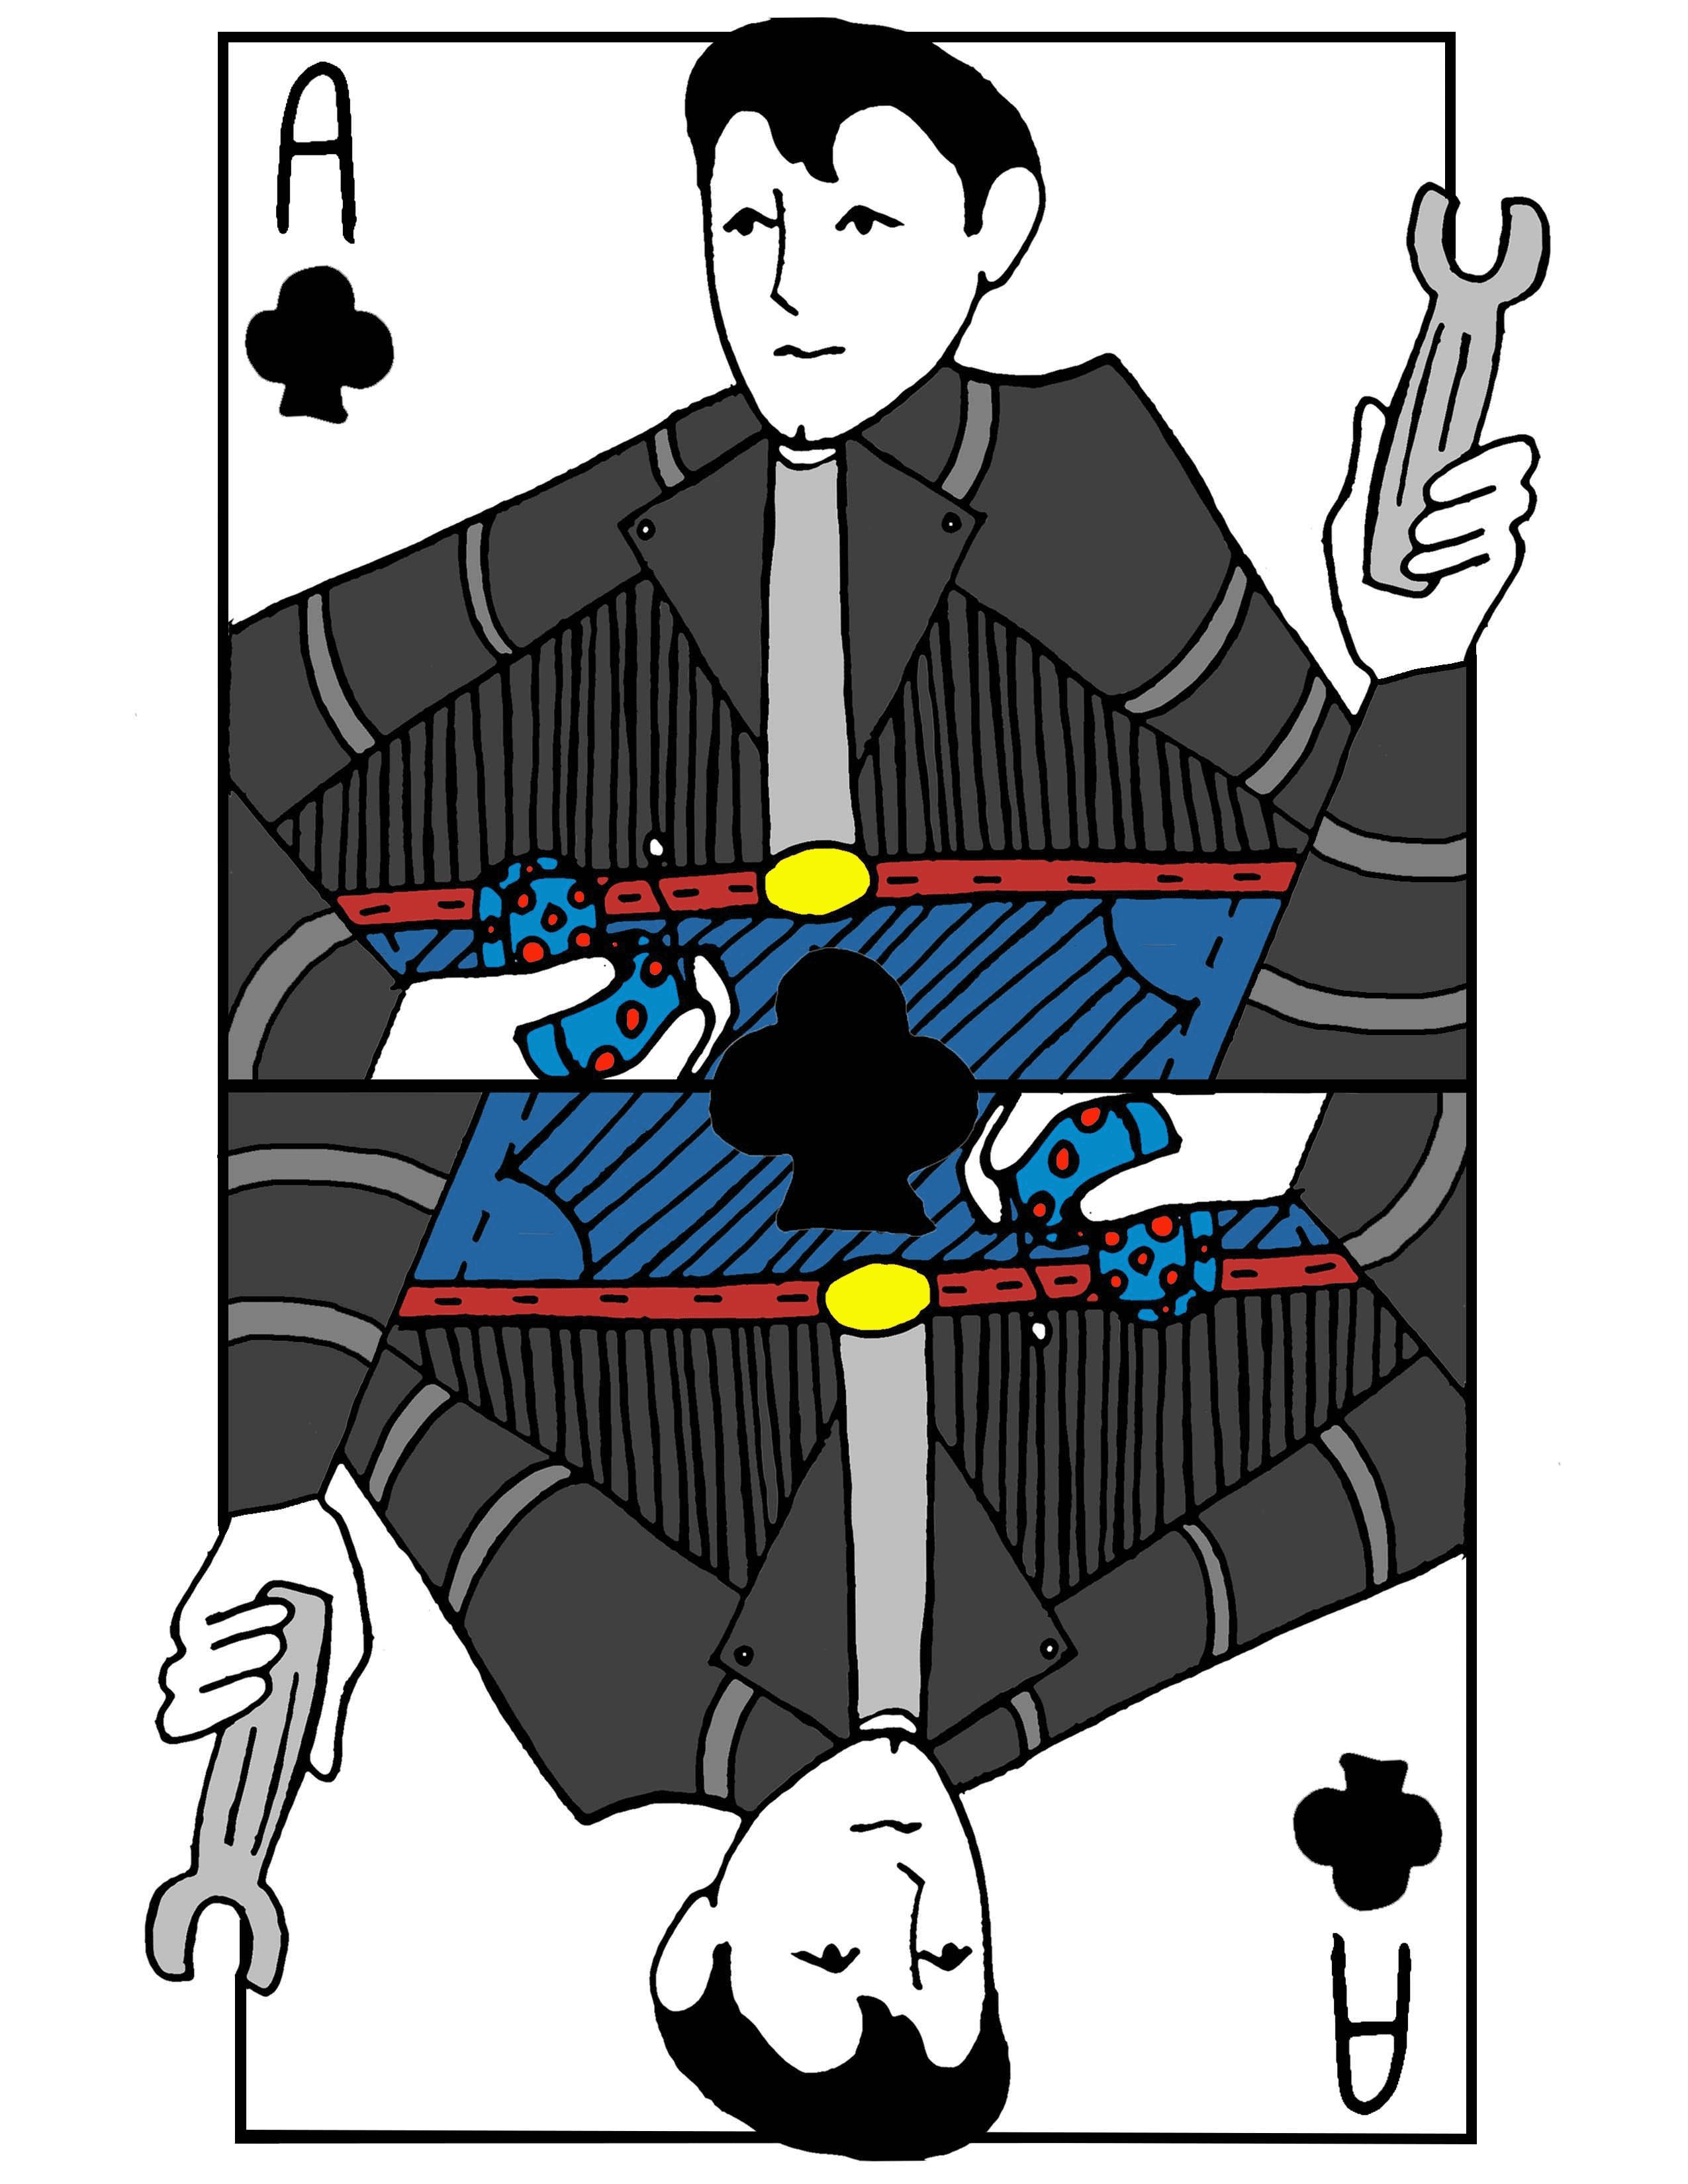 Ace of Clubs: Danny Zuko from Broadway's Grease